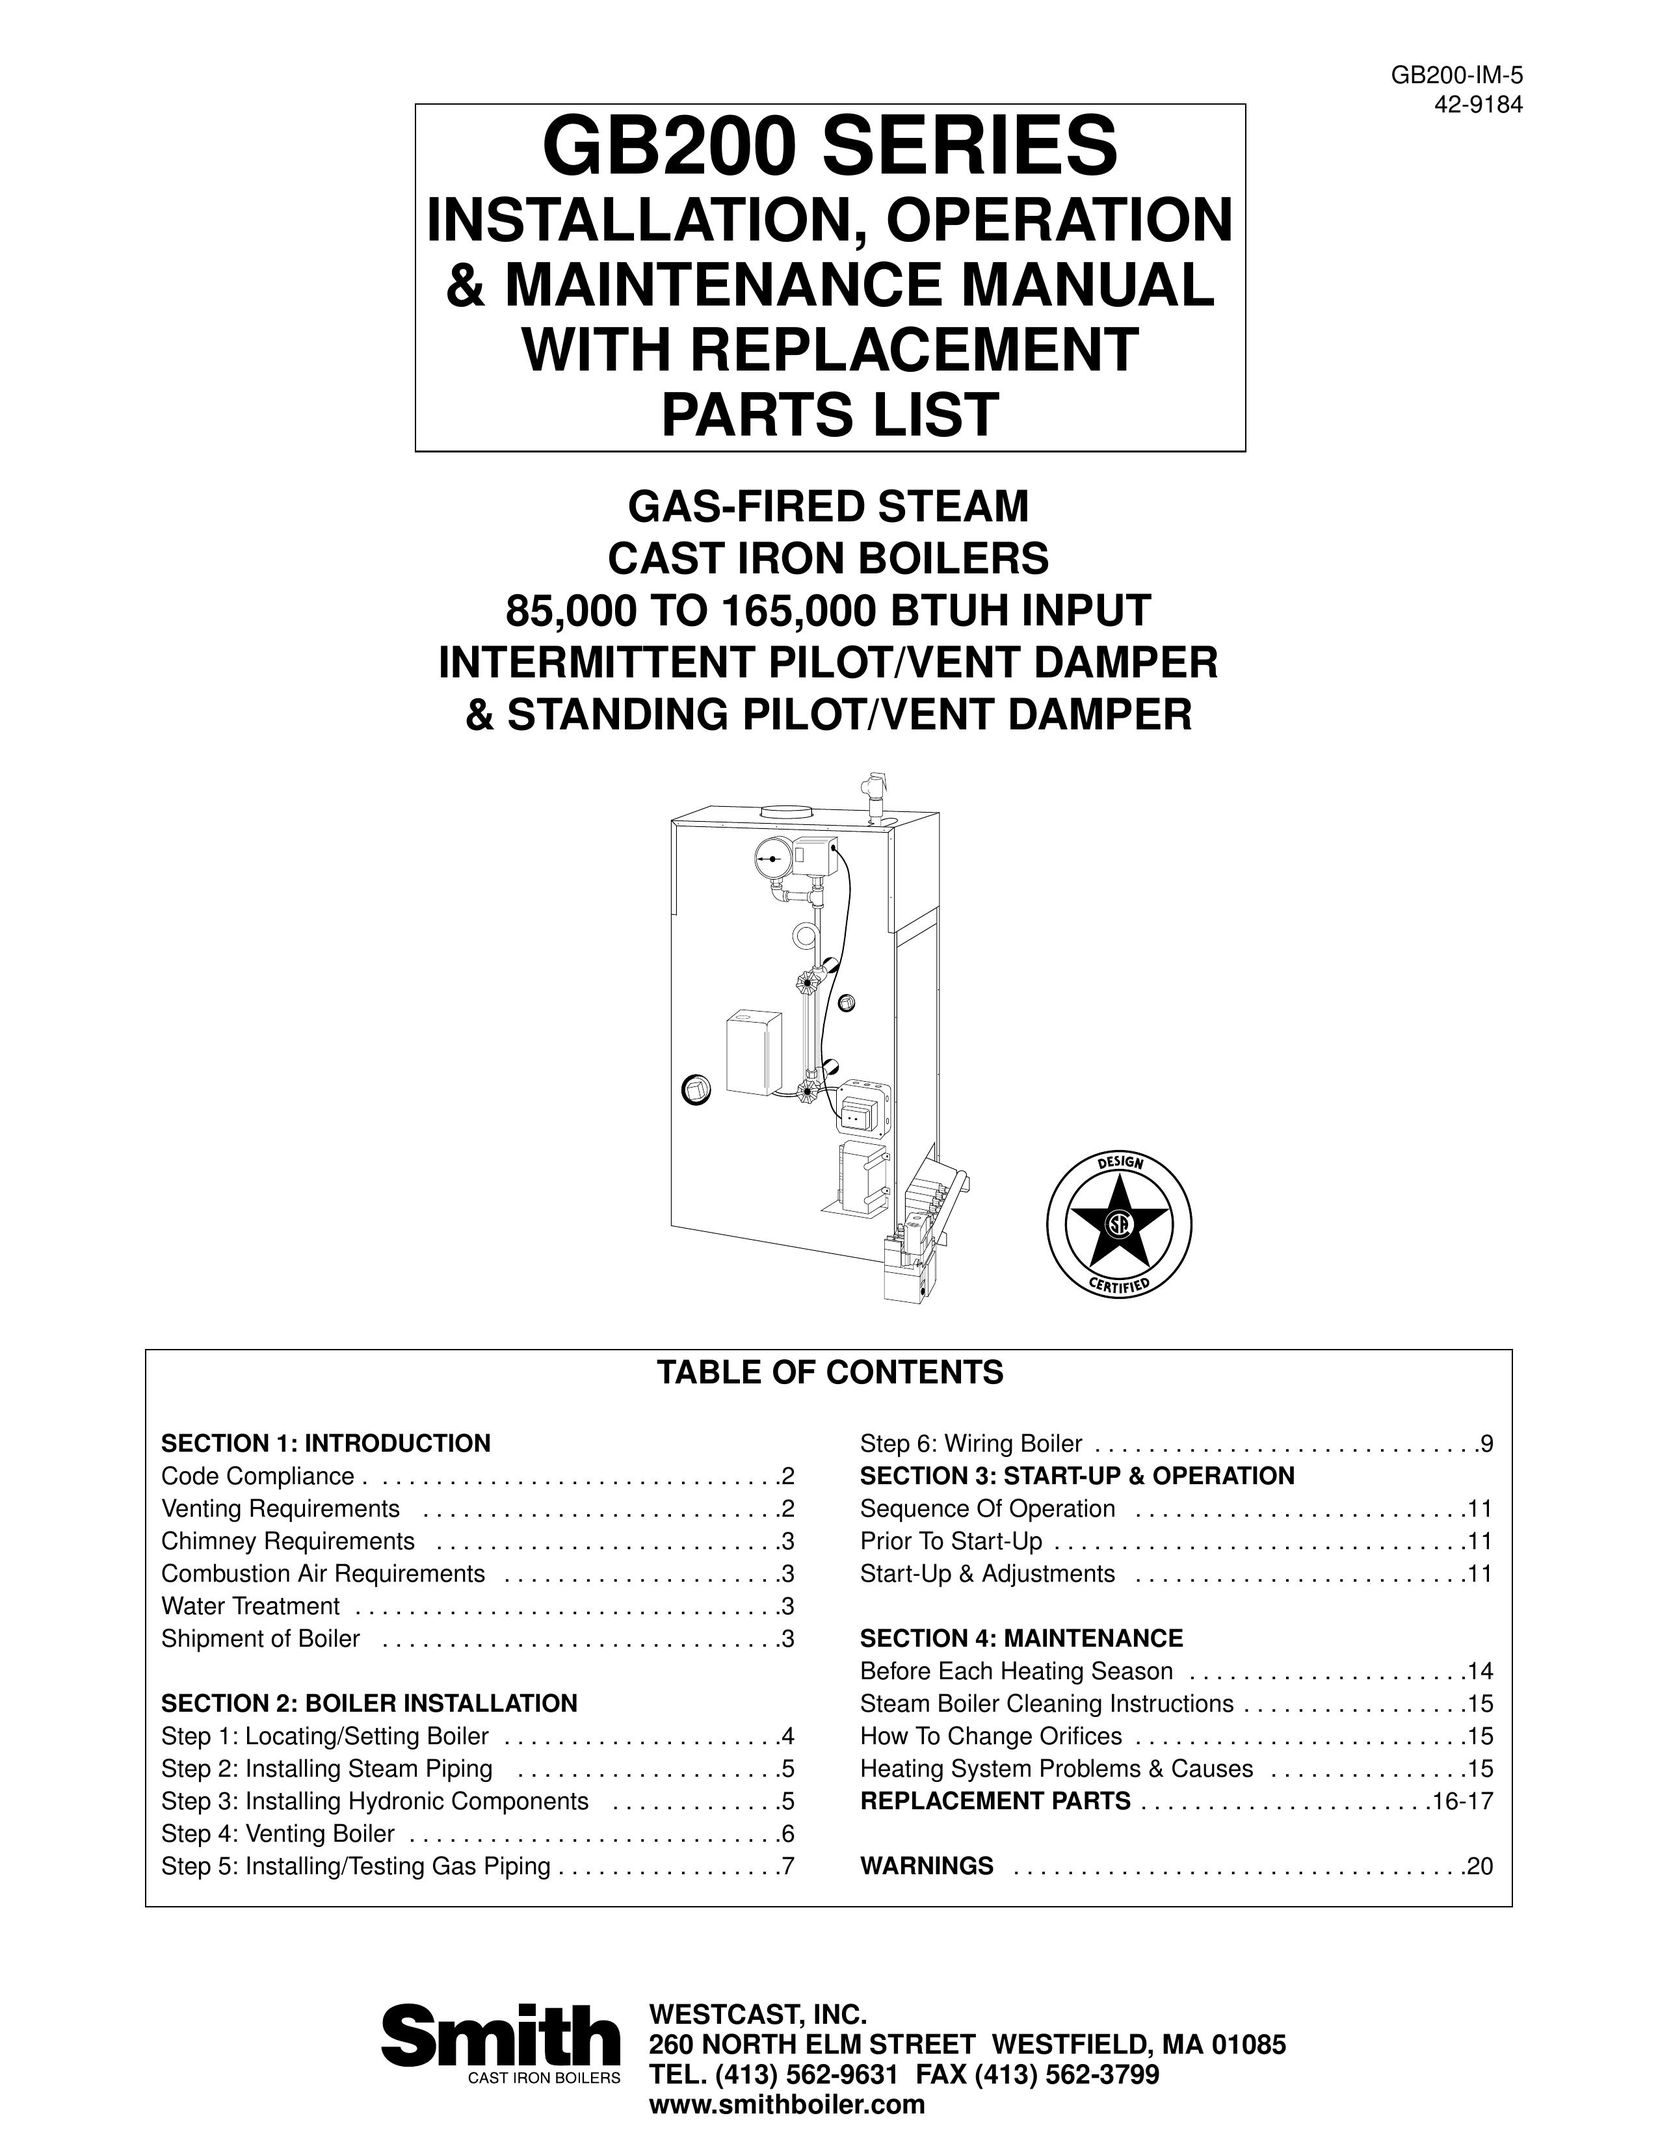 Smith Cast Iron Boilers GB200 SERIES Boiler User Manual